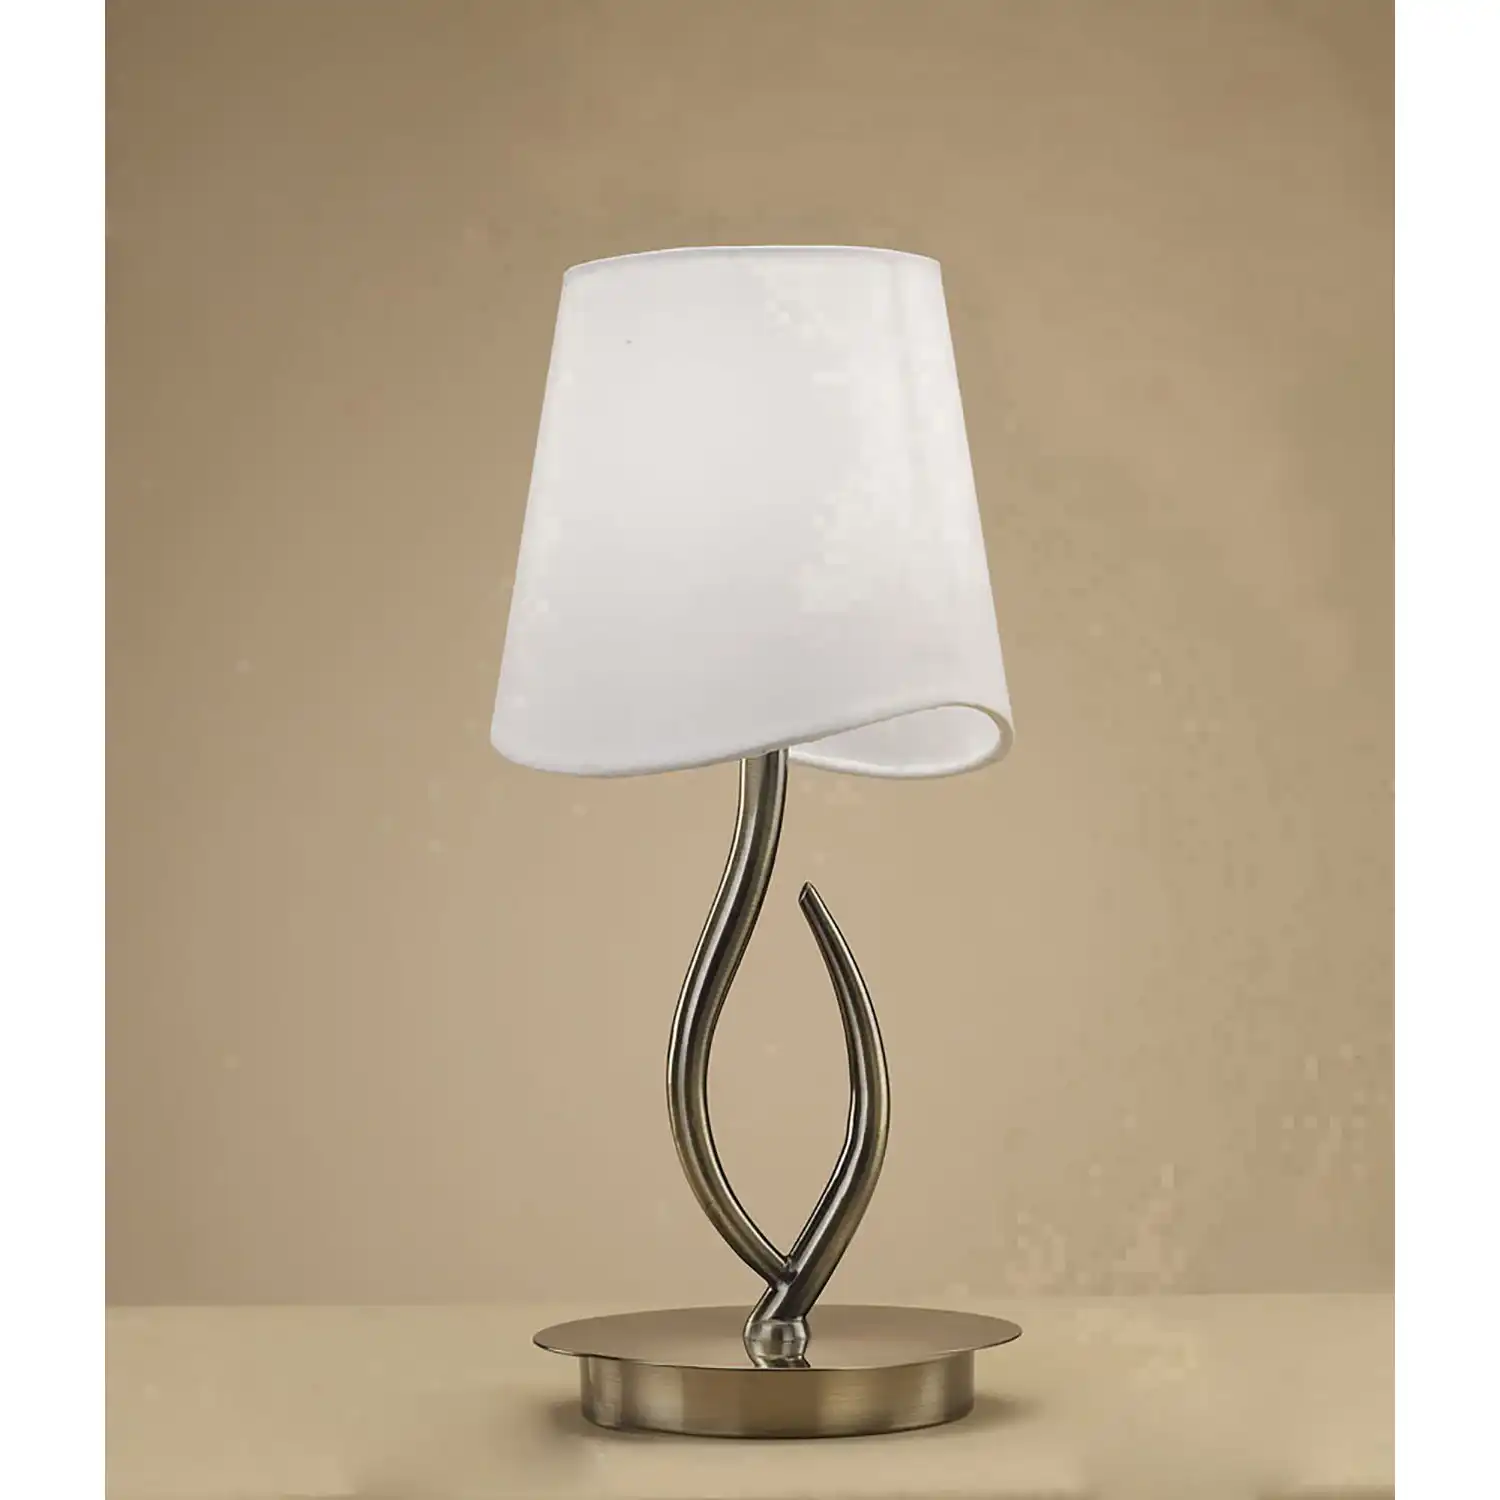 Ninette Table Lamp 1 Light E14 Small, Antique Brass With Ivory White Shade